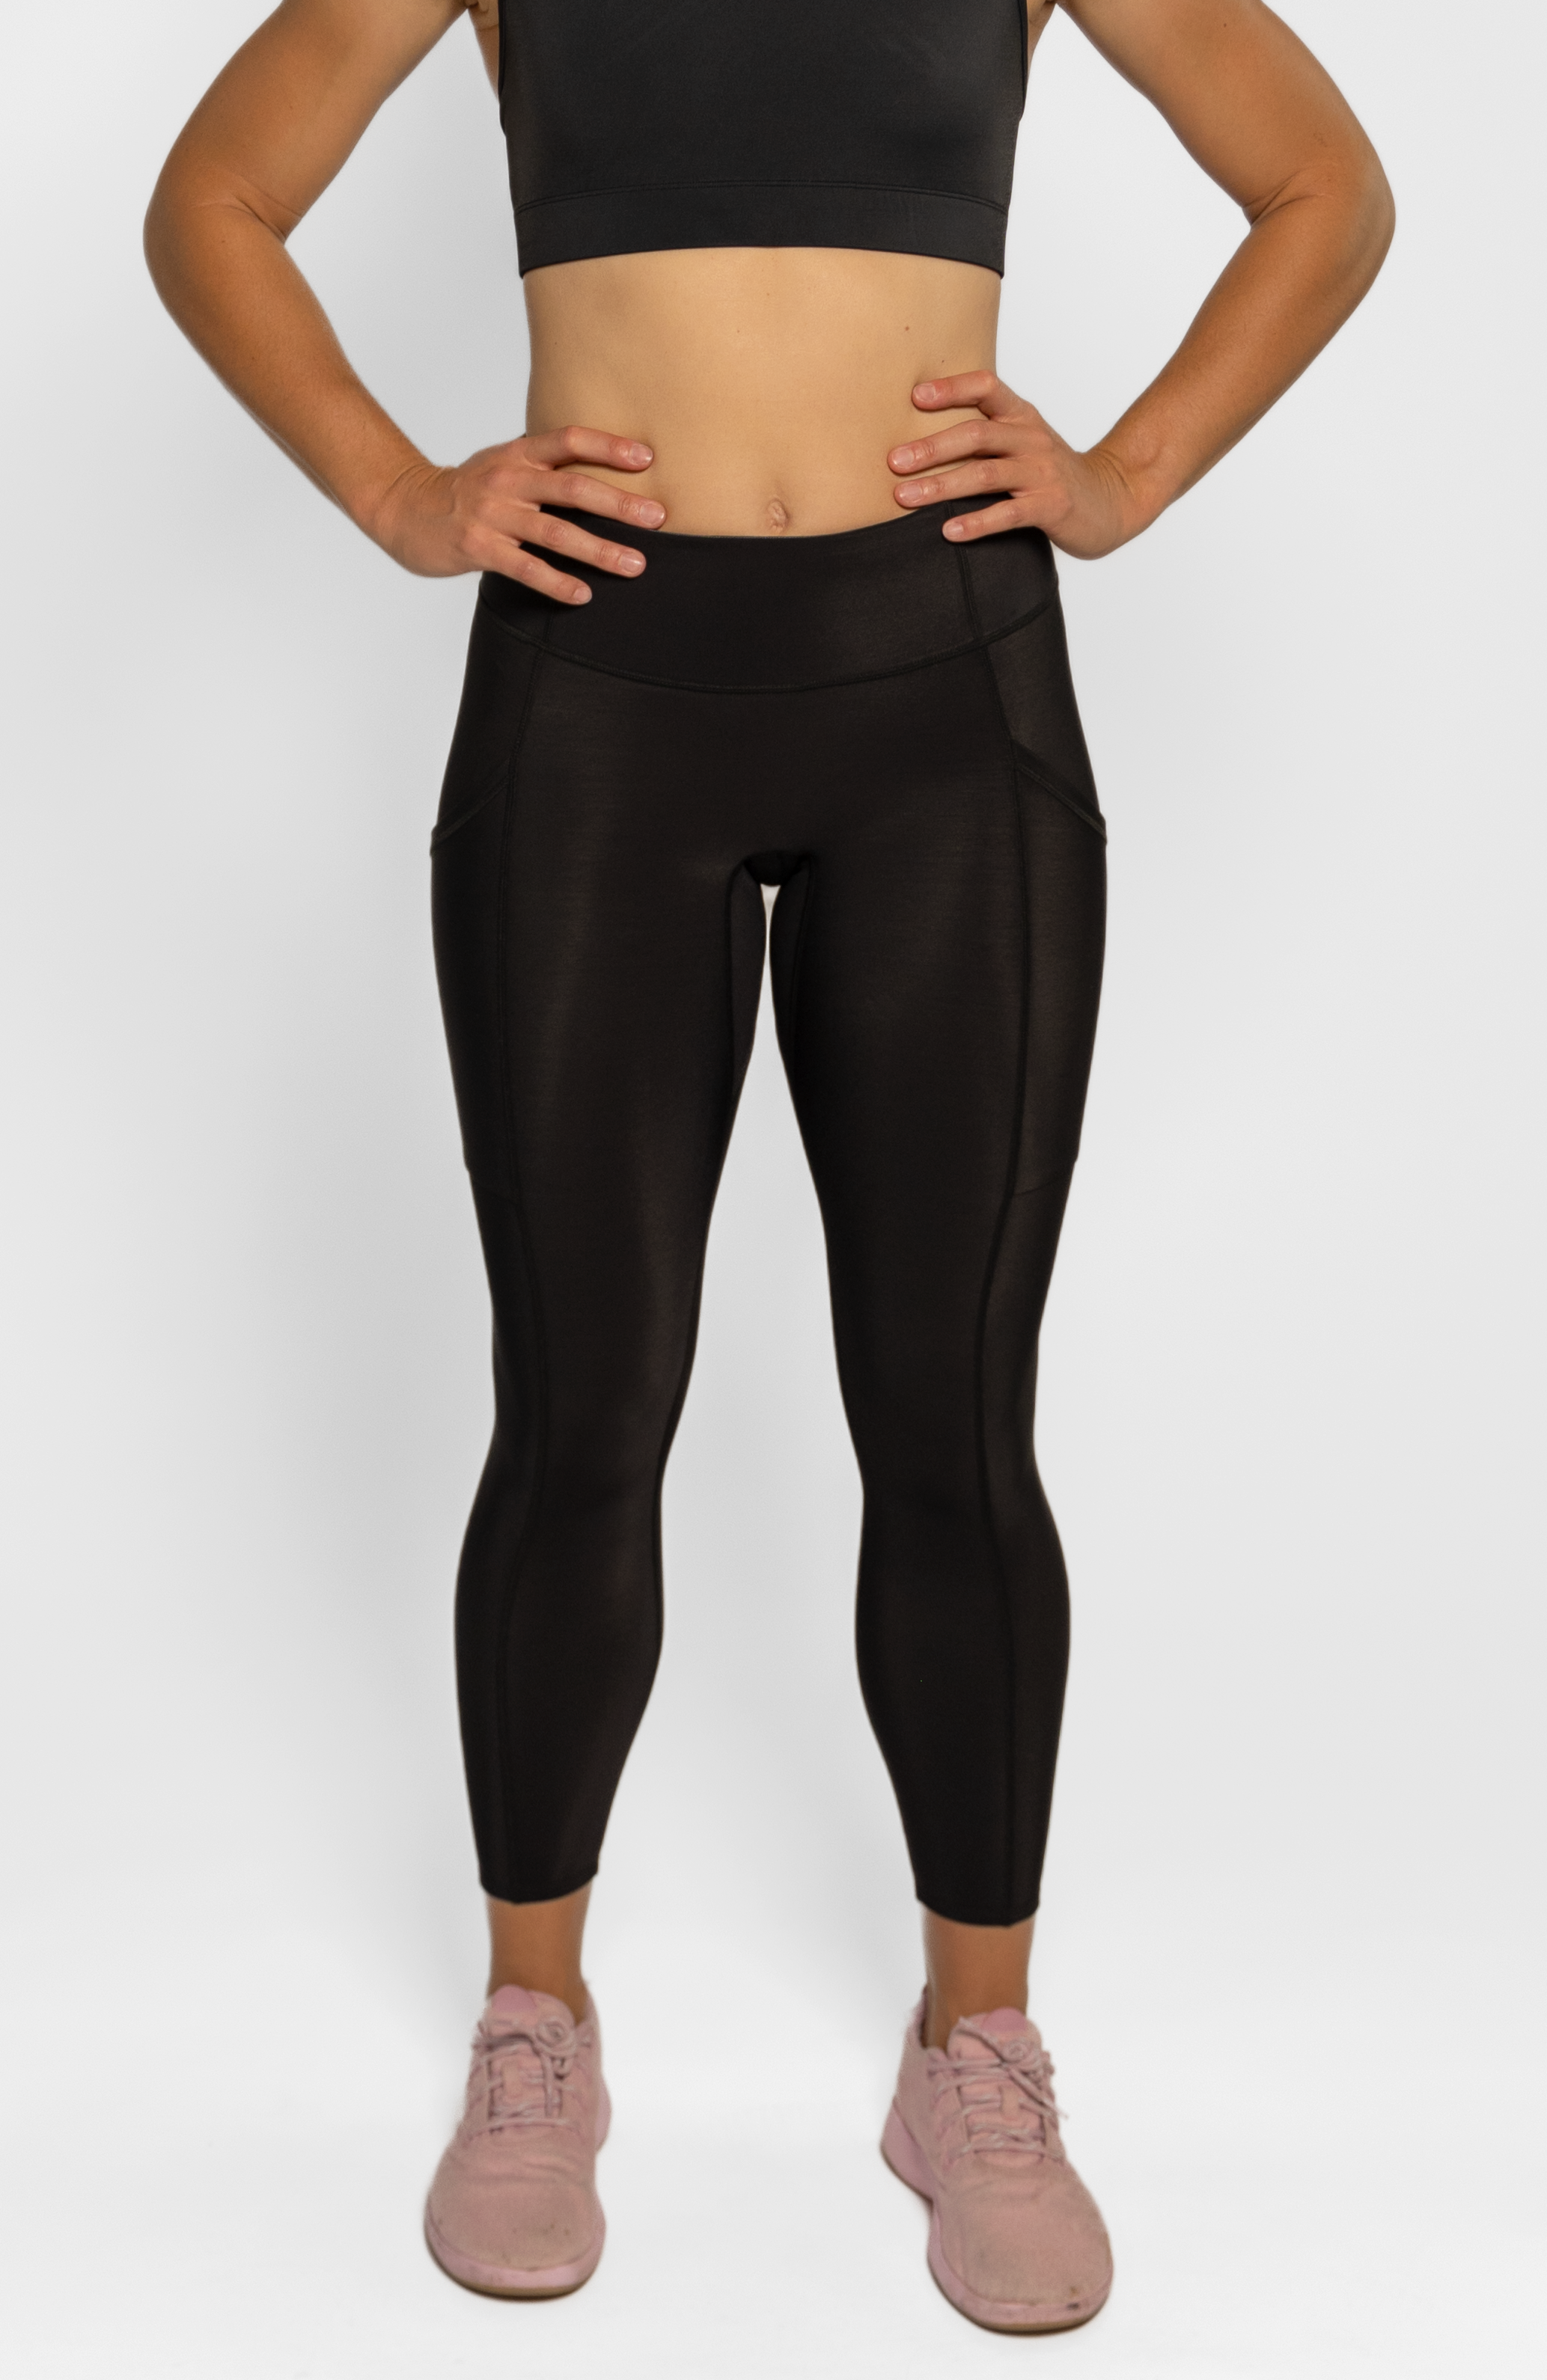 Black Tennis Leggings/Tights with Ball Pockets